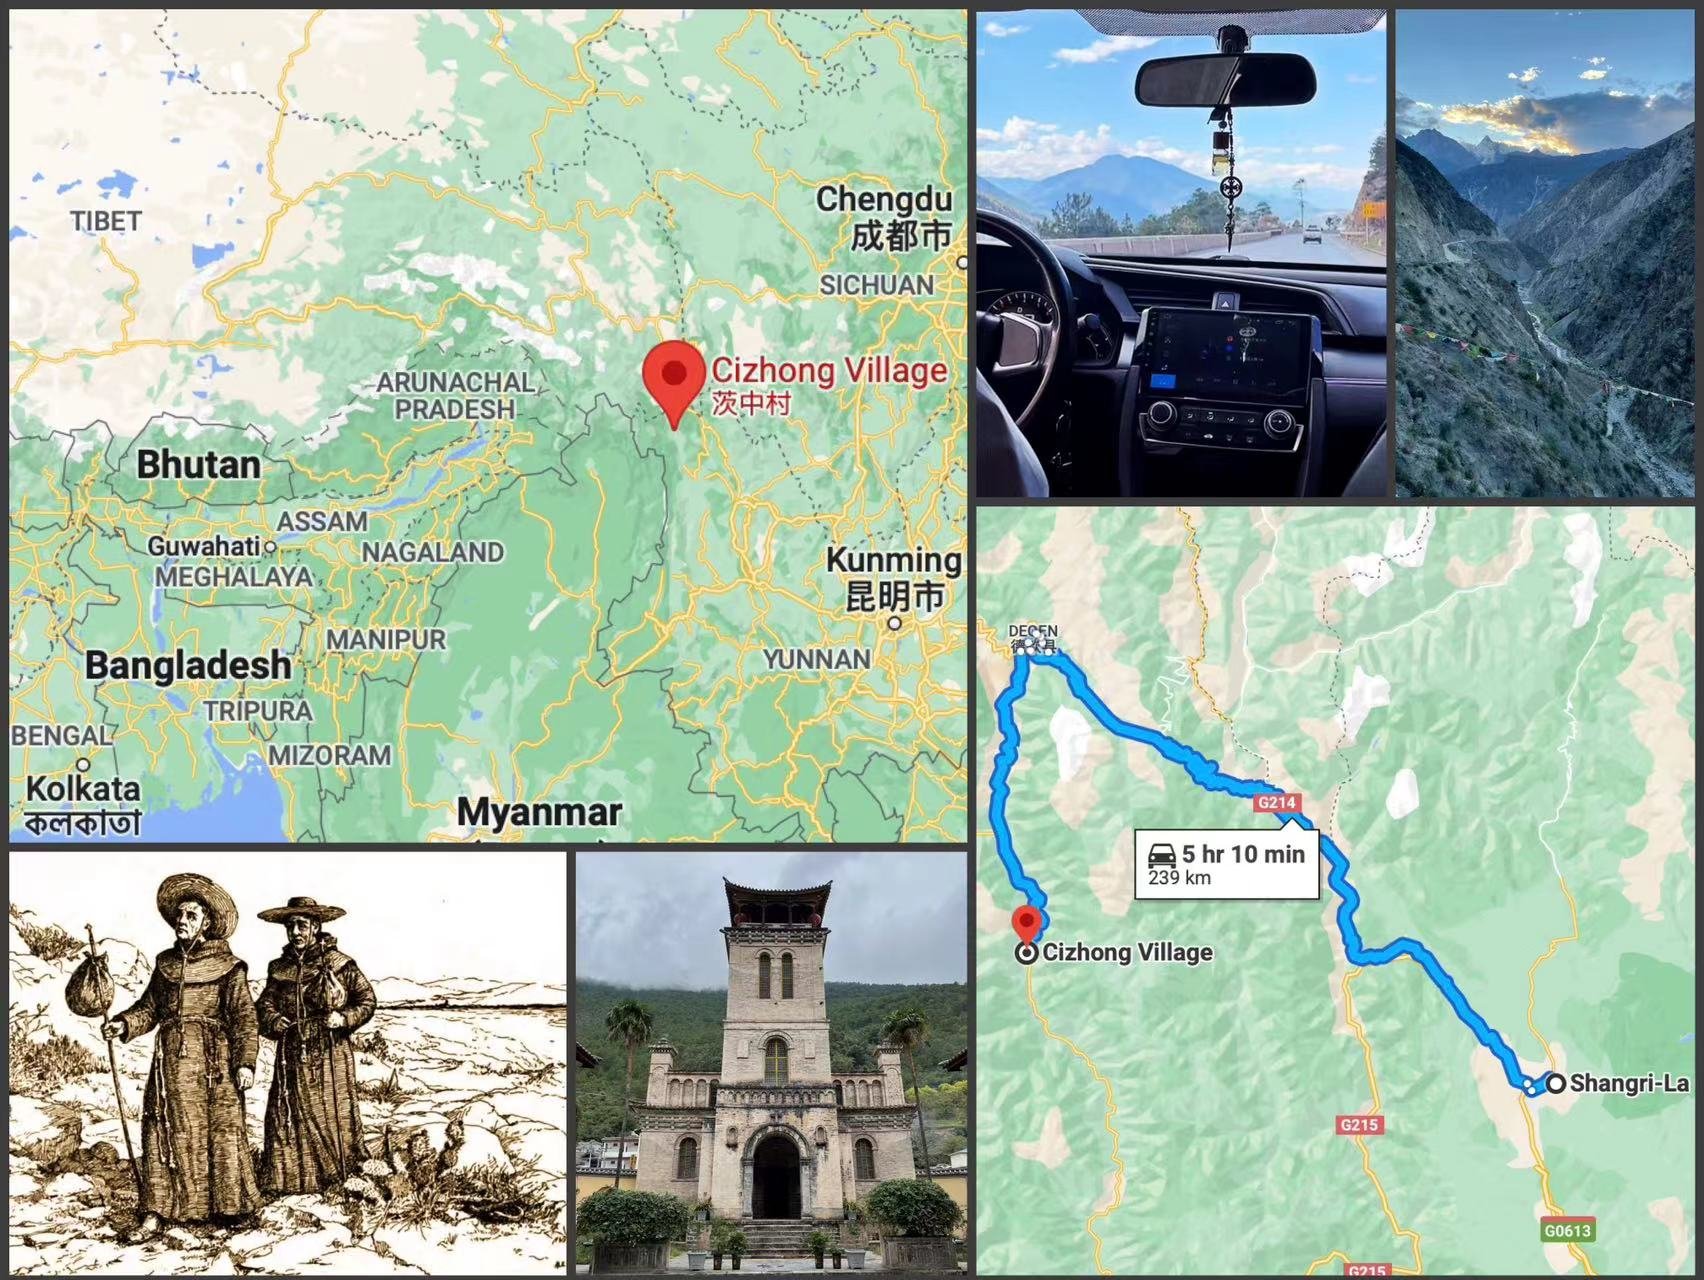 Bertrand Cristau: The village of 茨中 [Cízhōng] is near Central Tibet and Myanmar, and is famous for a church that was first built there by French missionaries.